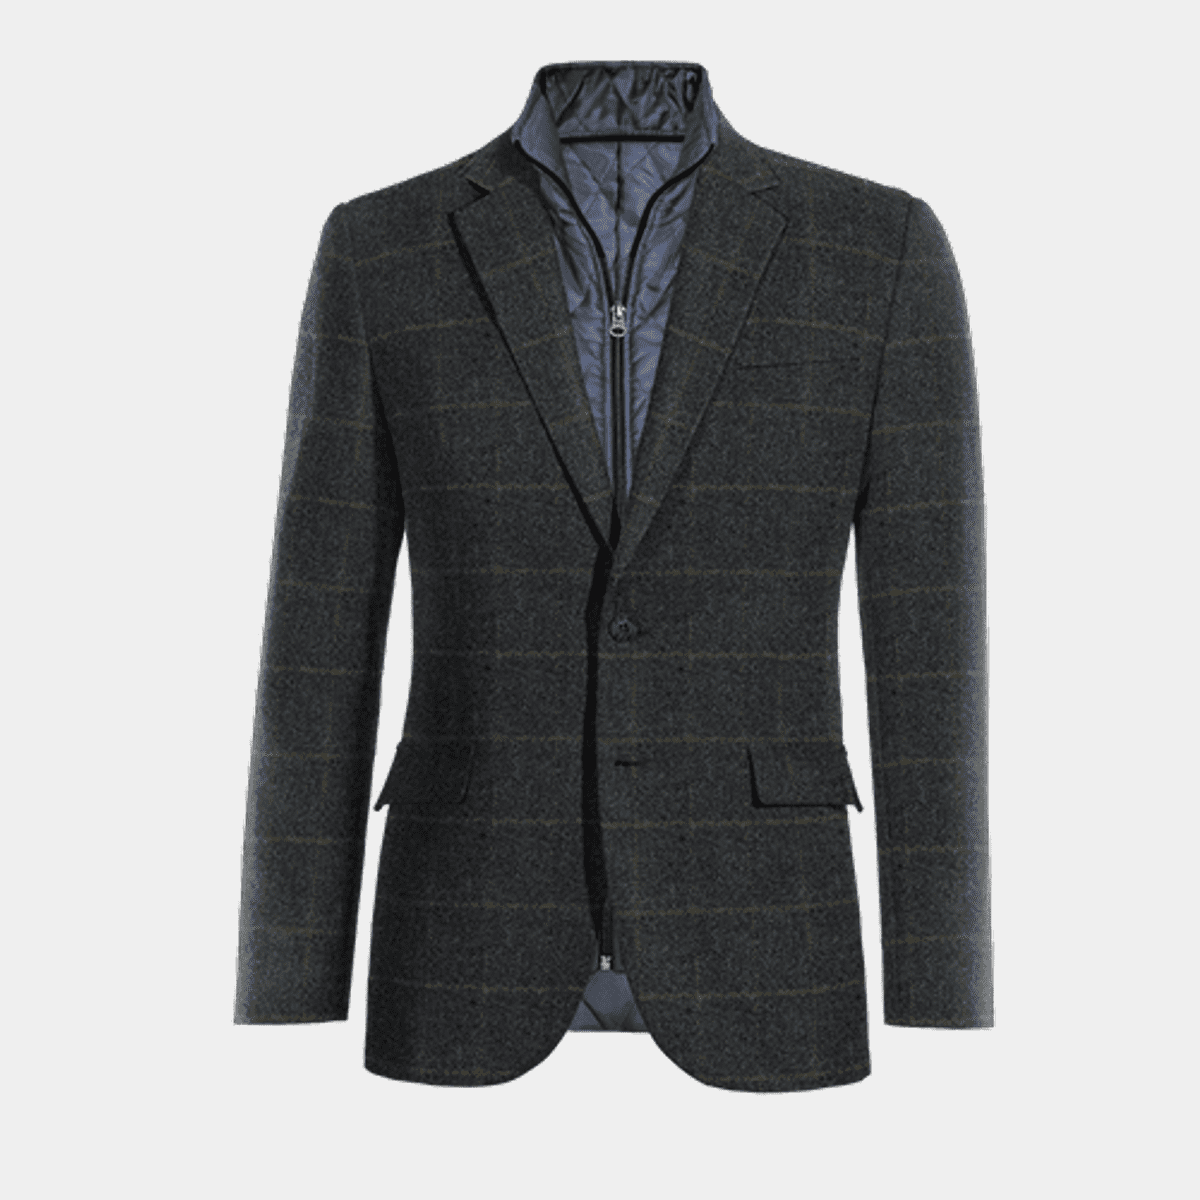 Blue Checkered Tweed Suit Jacket with removable padded piece